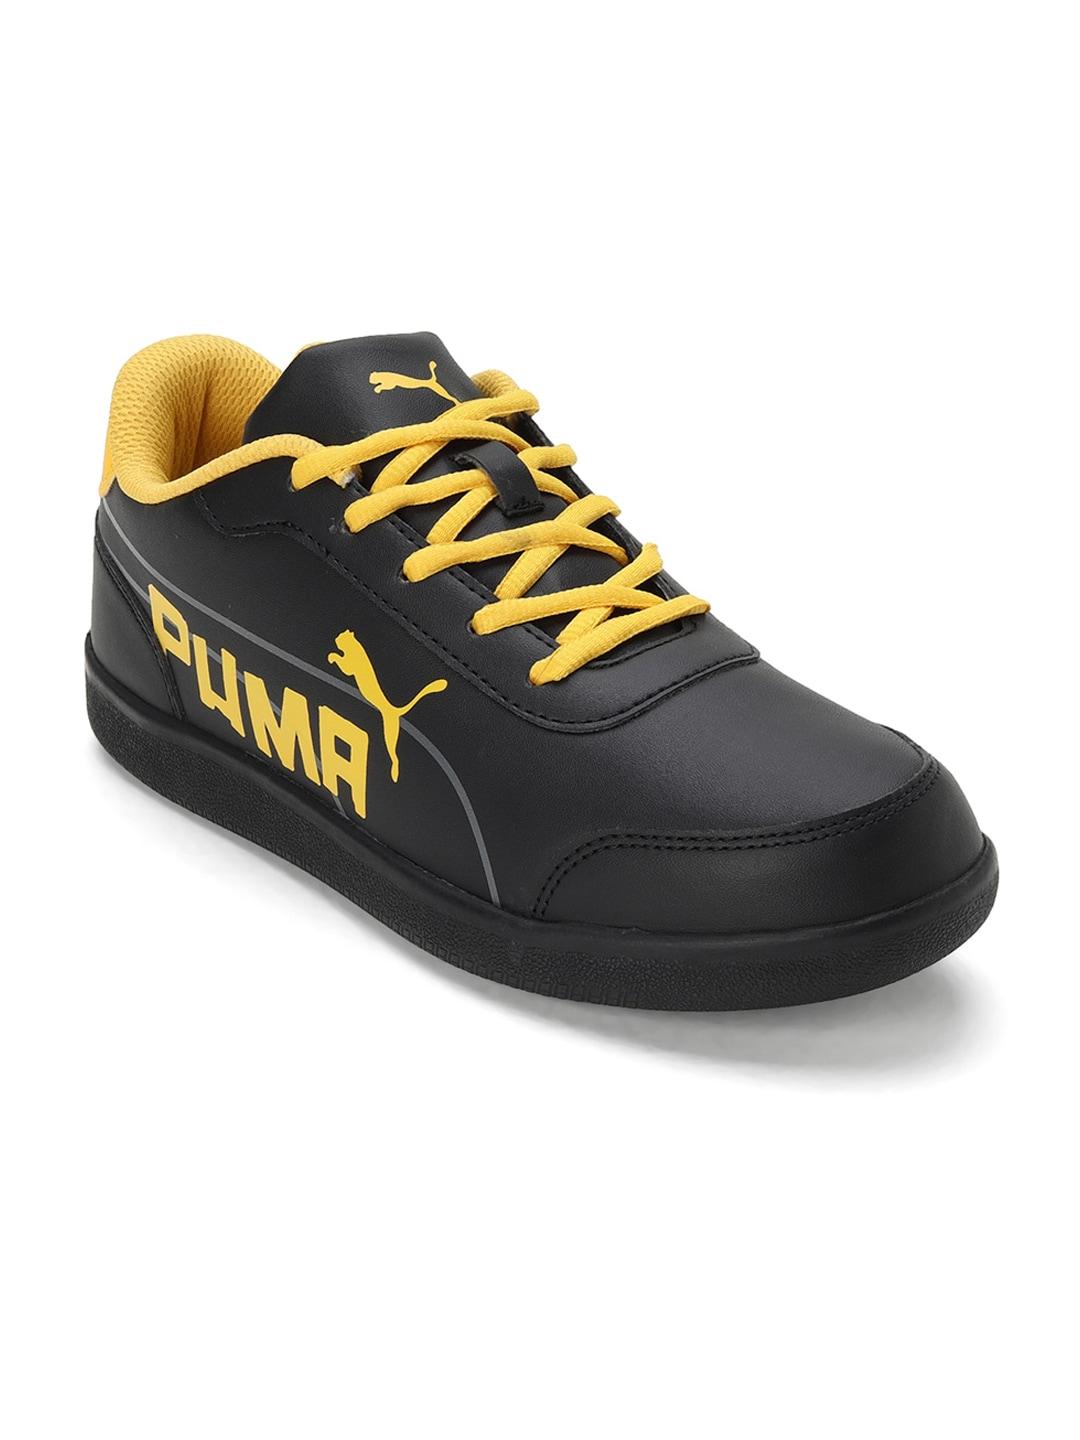 Puma Boys Dreamcat Youth Sneakers